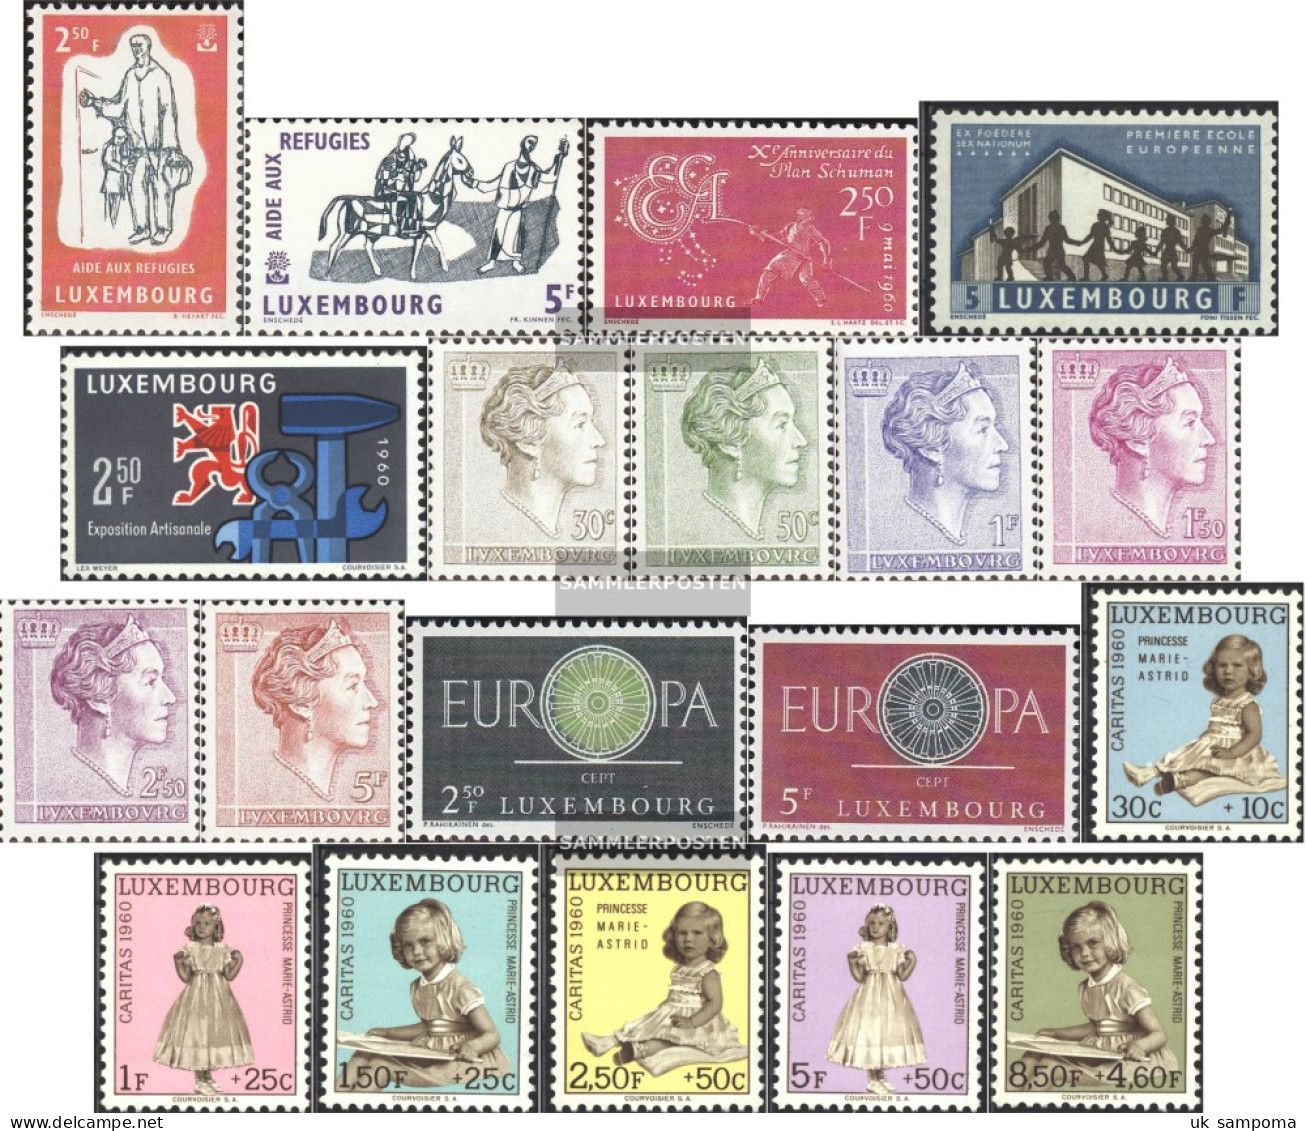 Luxembourg Unmounted Mint / Never Hinged Refugee Years 1960 RefUgee YeArs, CAritAs EUrope U.A - Nuovi